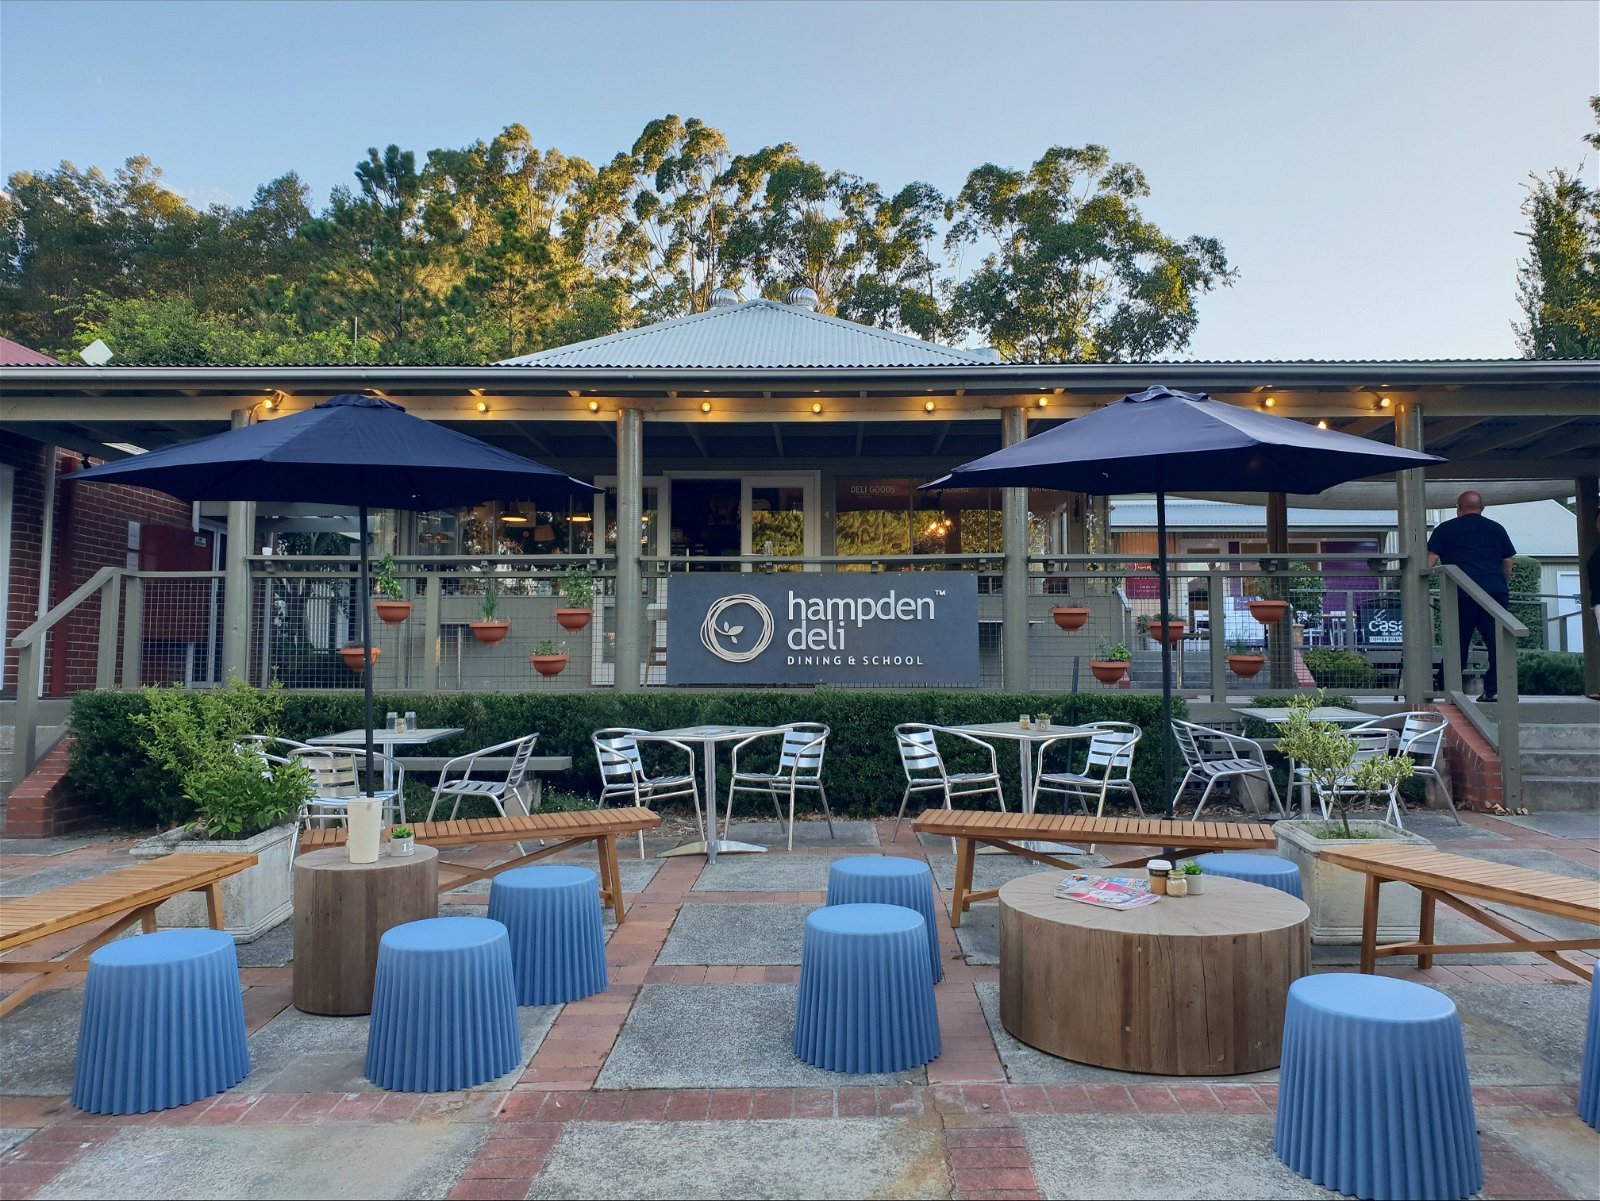 Hampden Deli Dining and School - Northern Rivers Accommodation